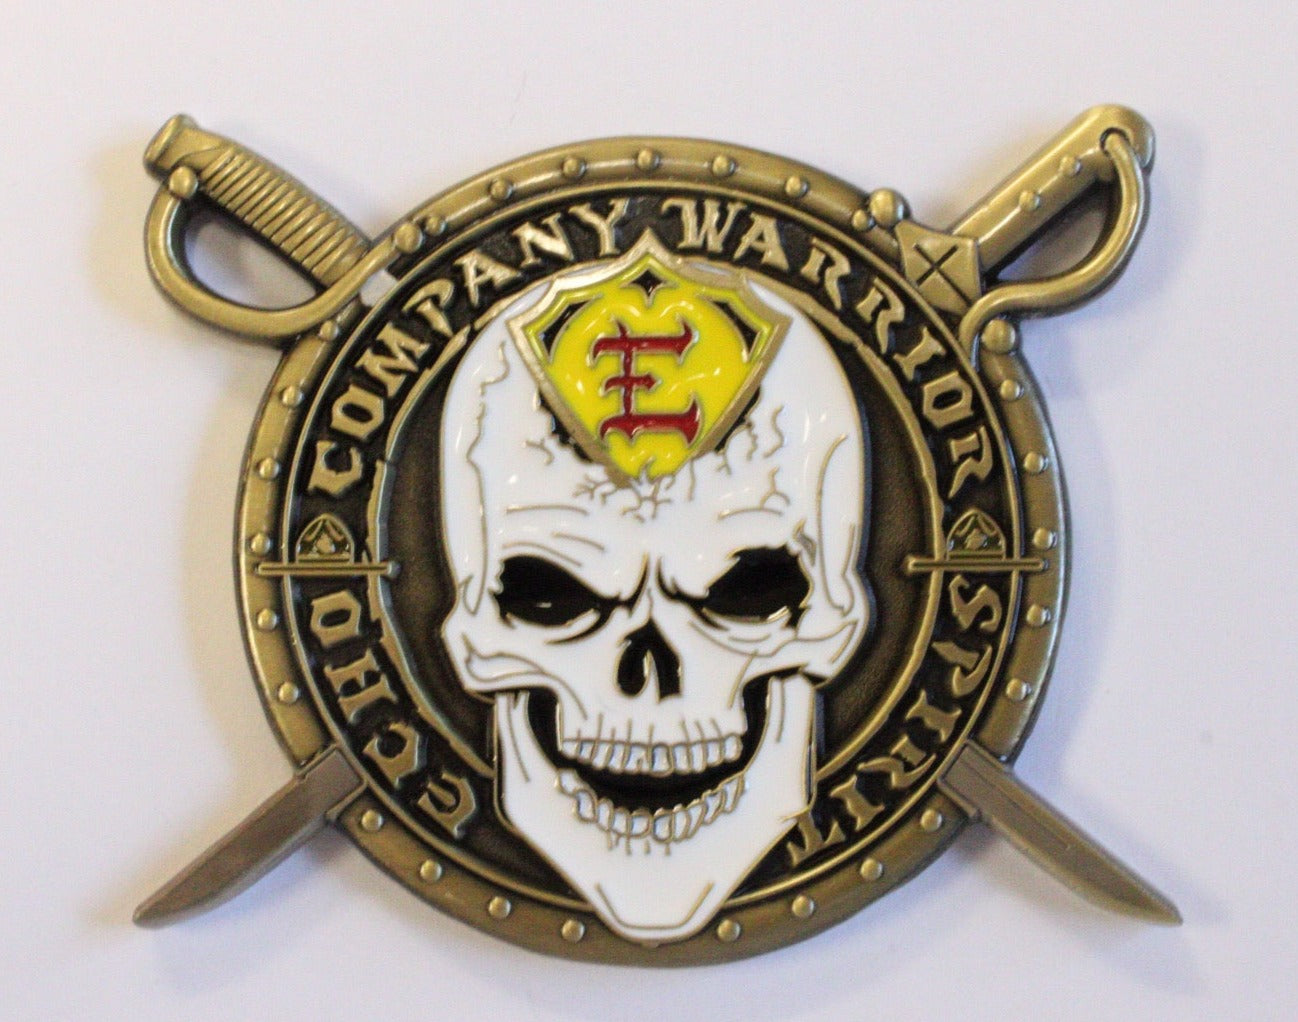 Echo Company Coin - Parris Island Museum